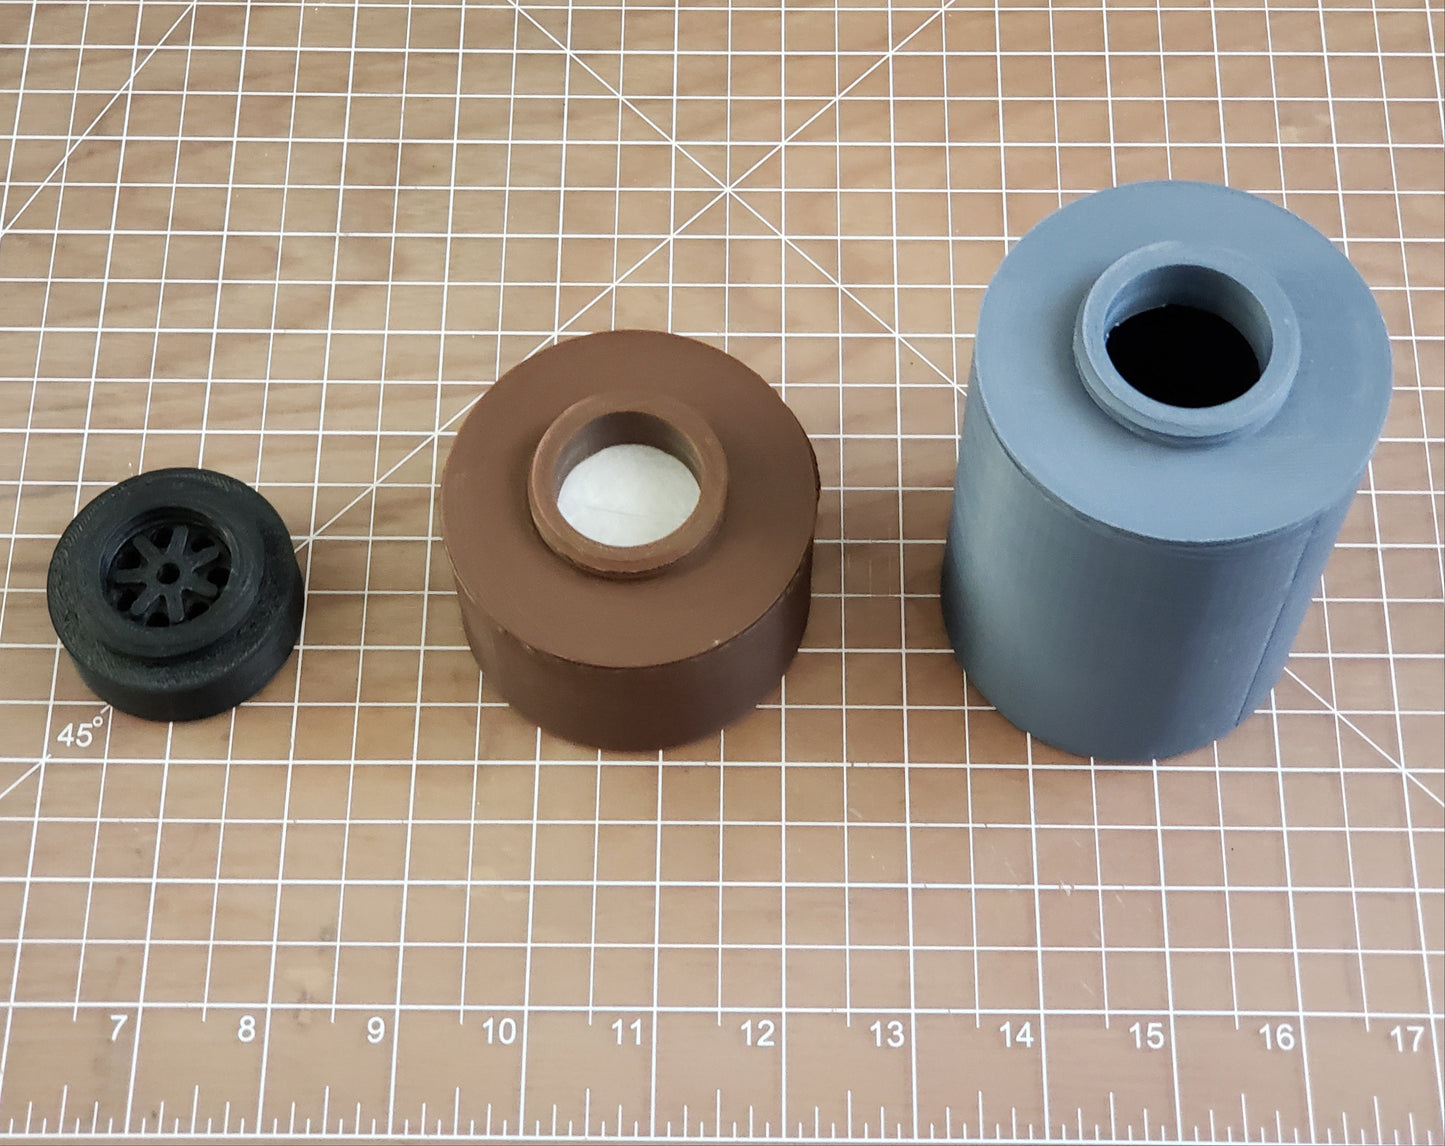 Voice Amp cover for 40mm NATO gas masks - 3D Printed ABS Plastic (canister only) - 3M 2200 mpr (merv13) filter media - m40/42 gas mask